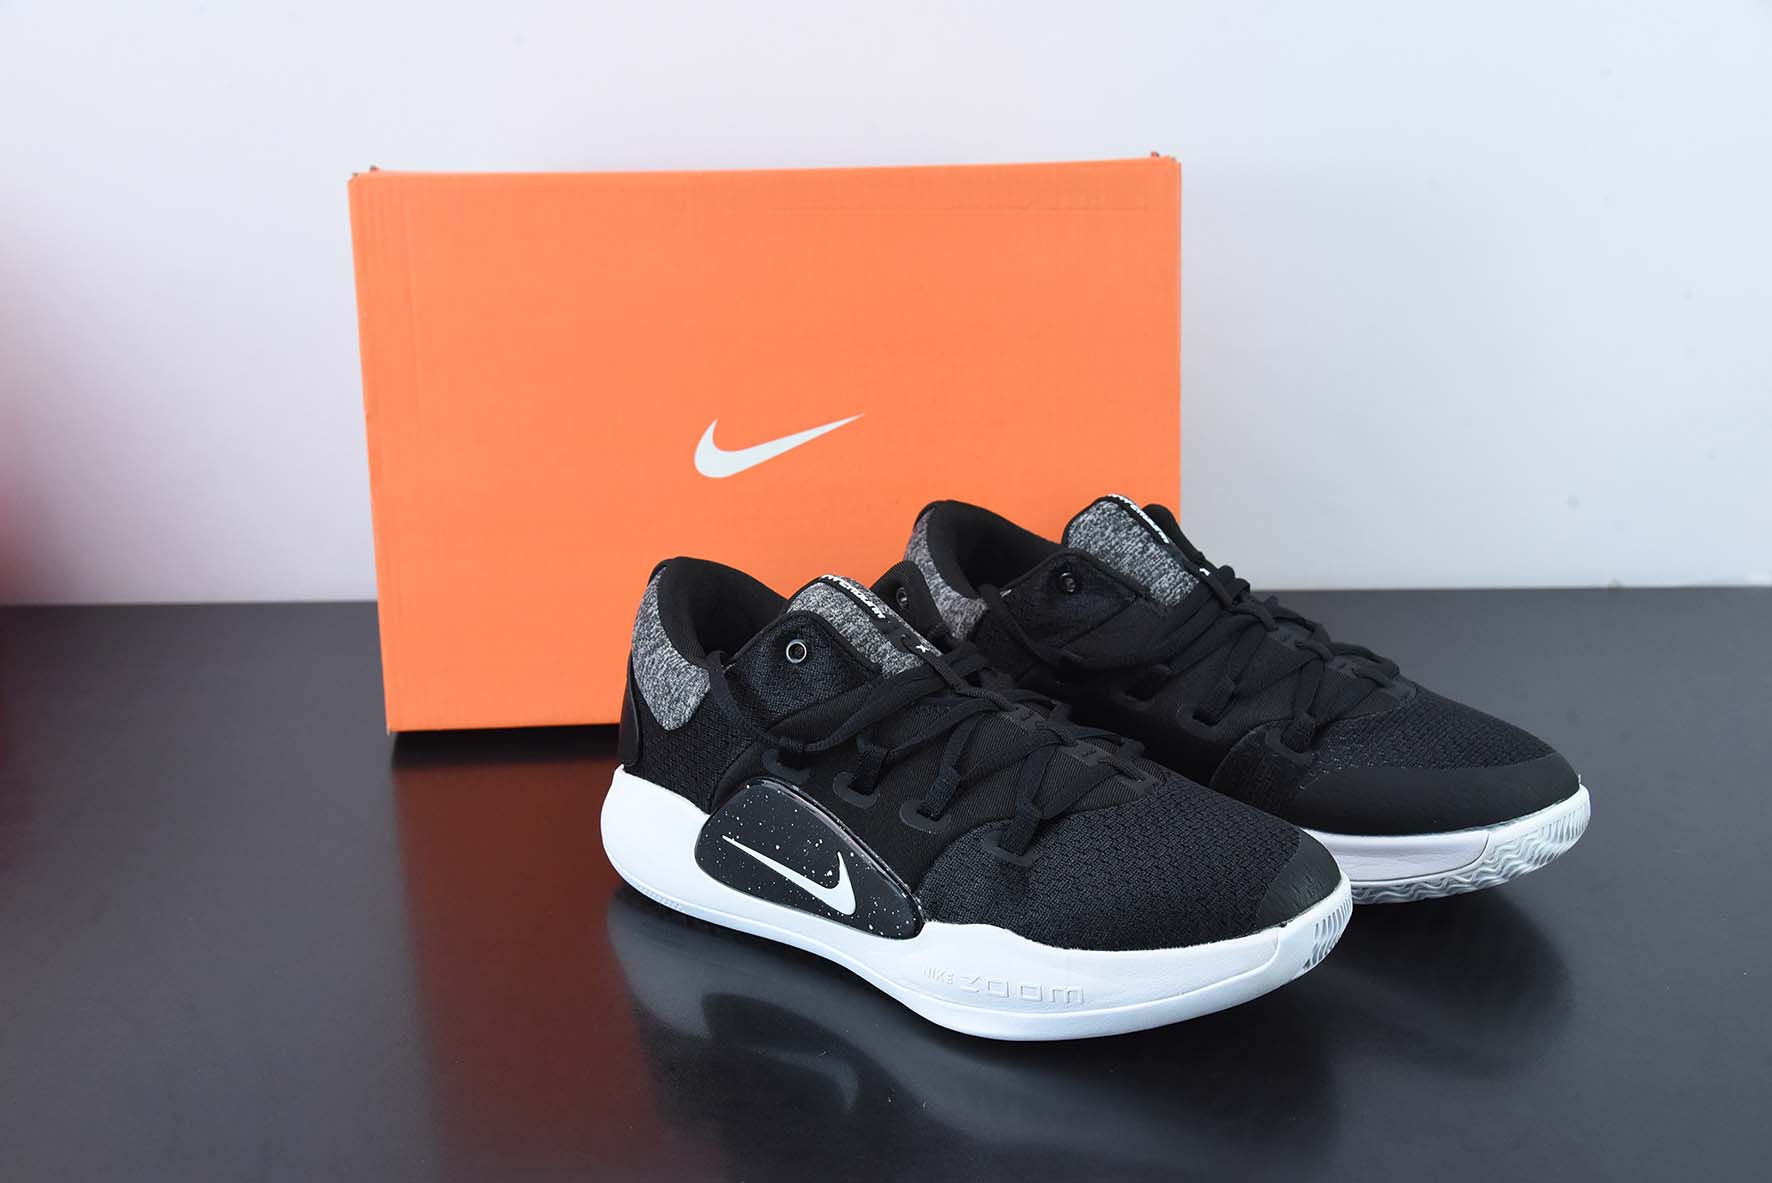 Hyperdunk X Low Oreo - nike total core mesh mens sneakers for women - 003 For Sale – nike lebron soldier 10 price philippines news